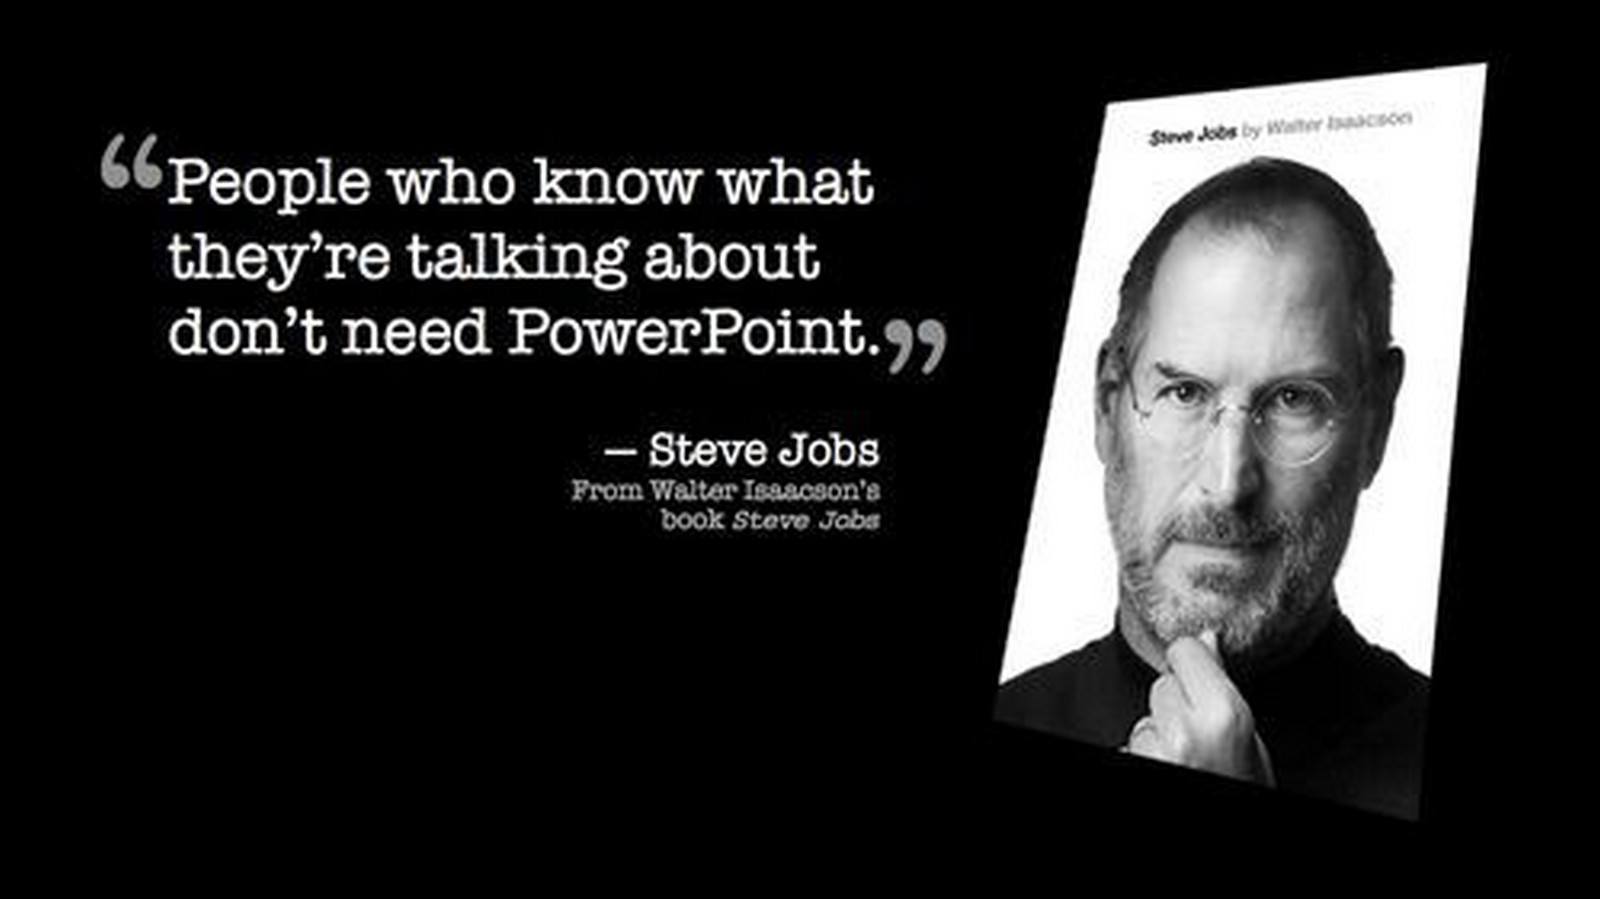 19 Best Steve Jobs Quotes - "People who know what they're talking about don't need PowerPoint."